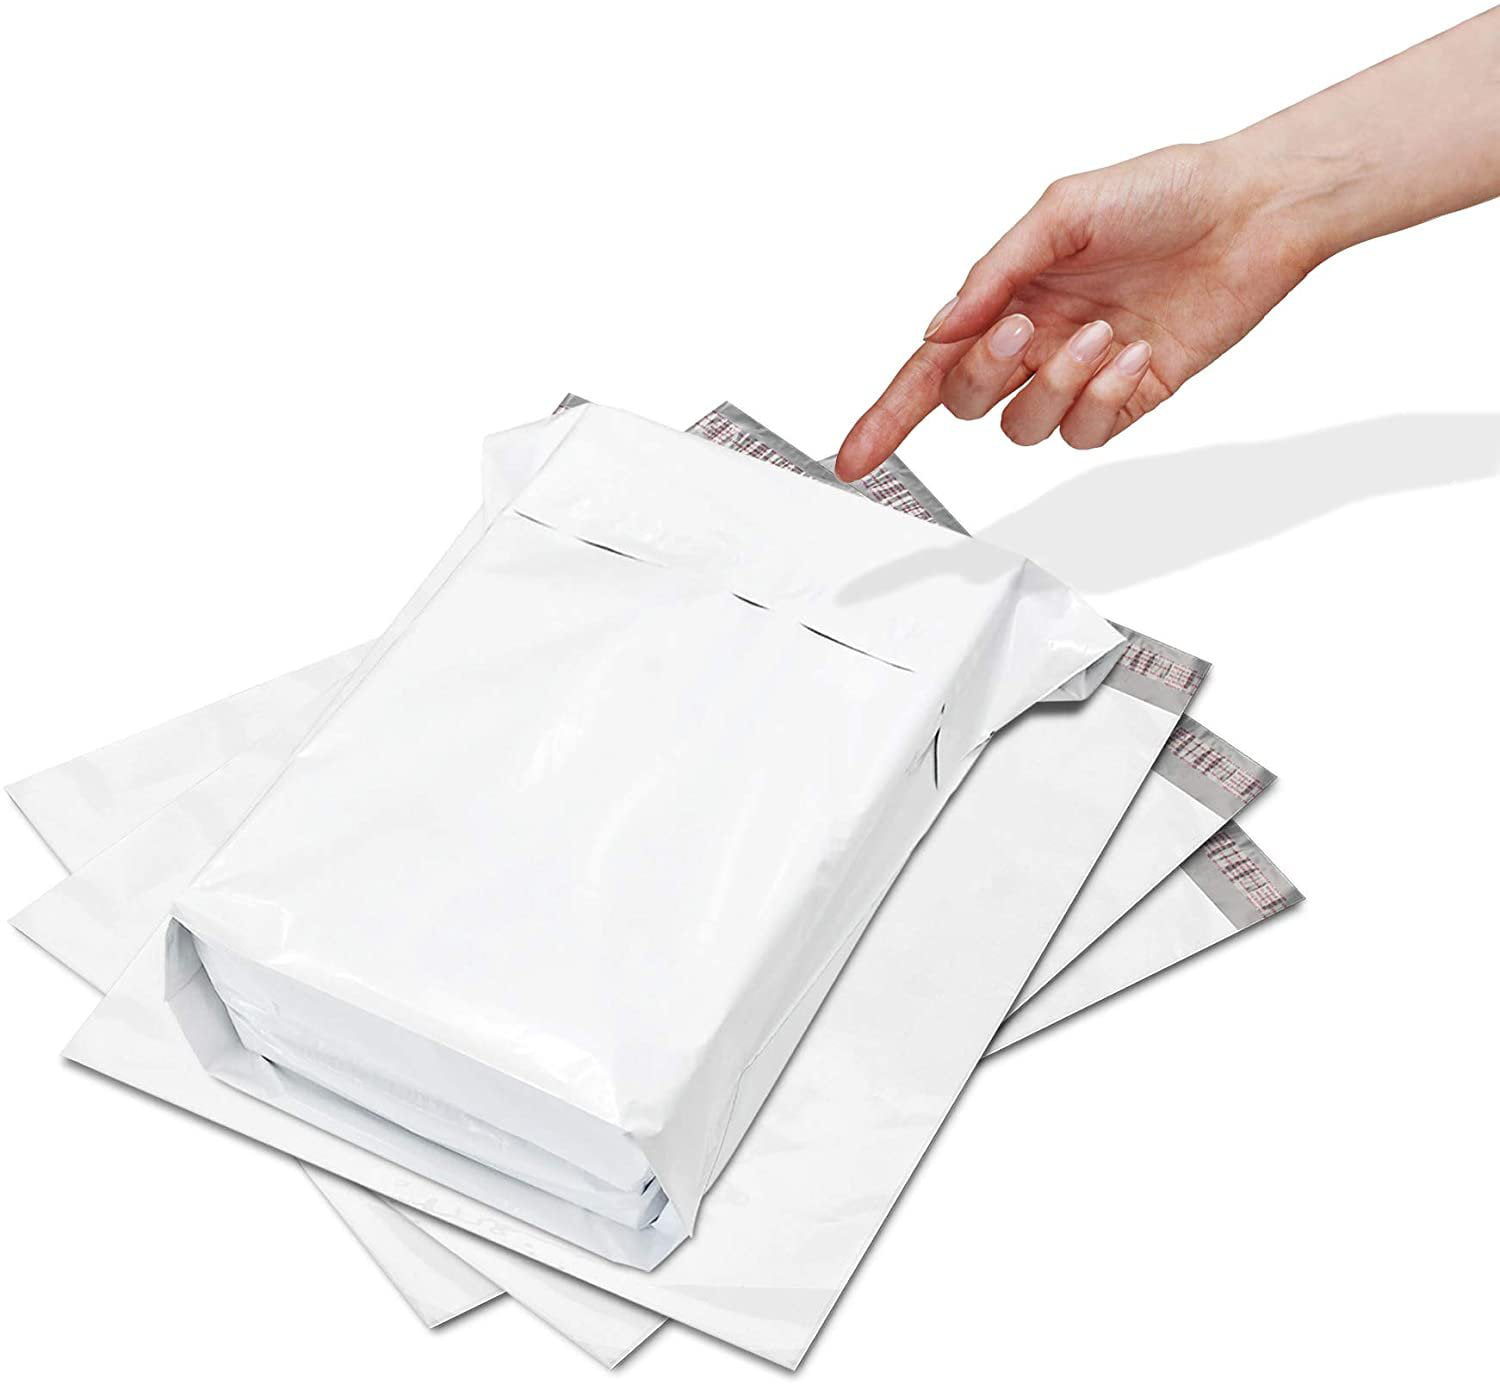 30 14.5x19 WHITE POLY MAILERS SHIPPING ENVELOPES BAGS 